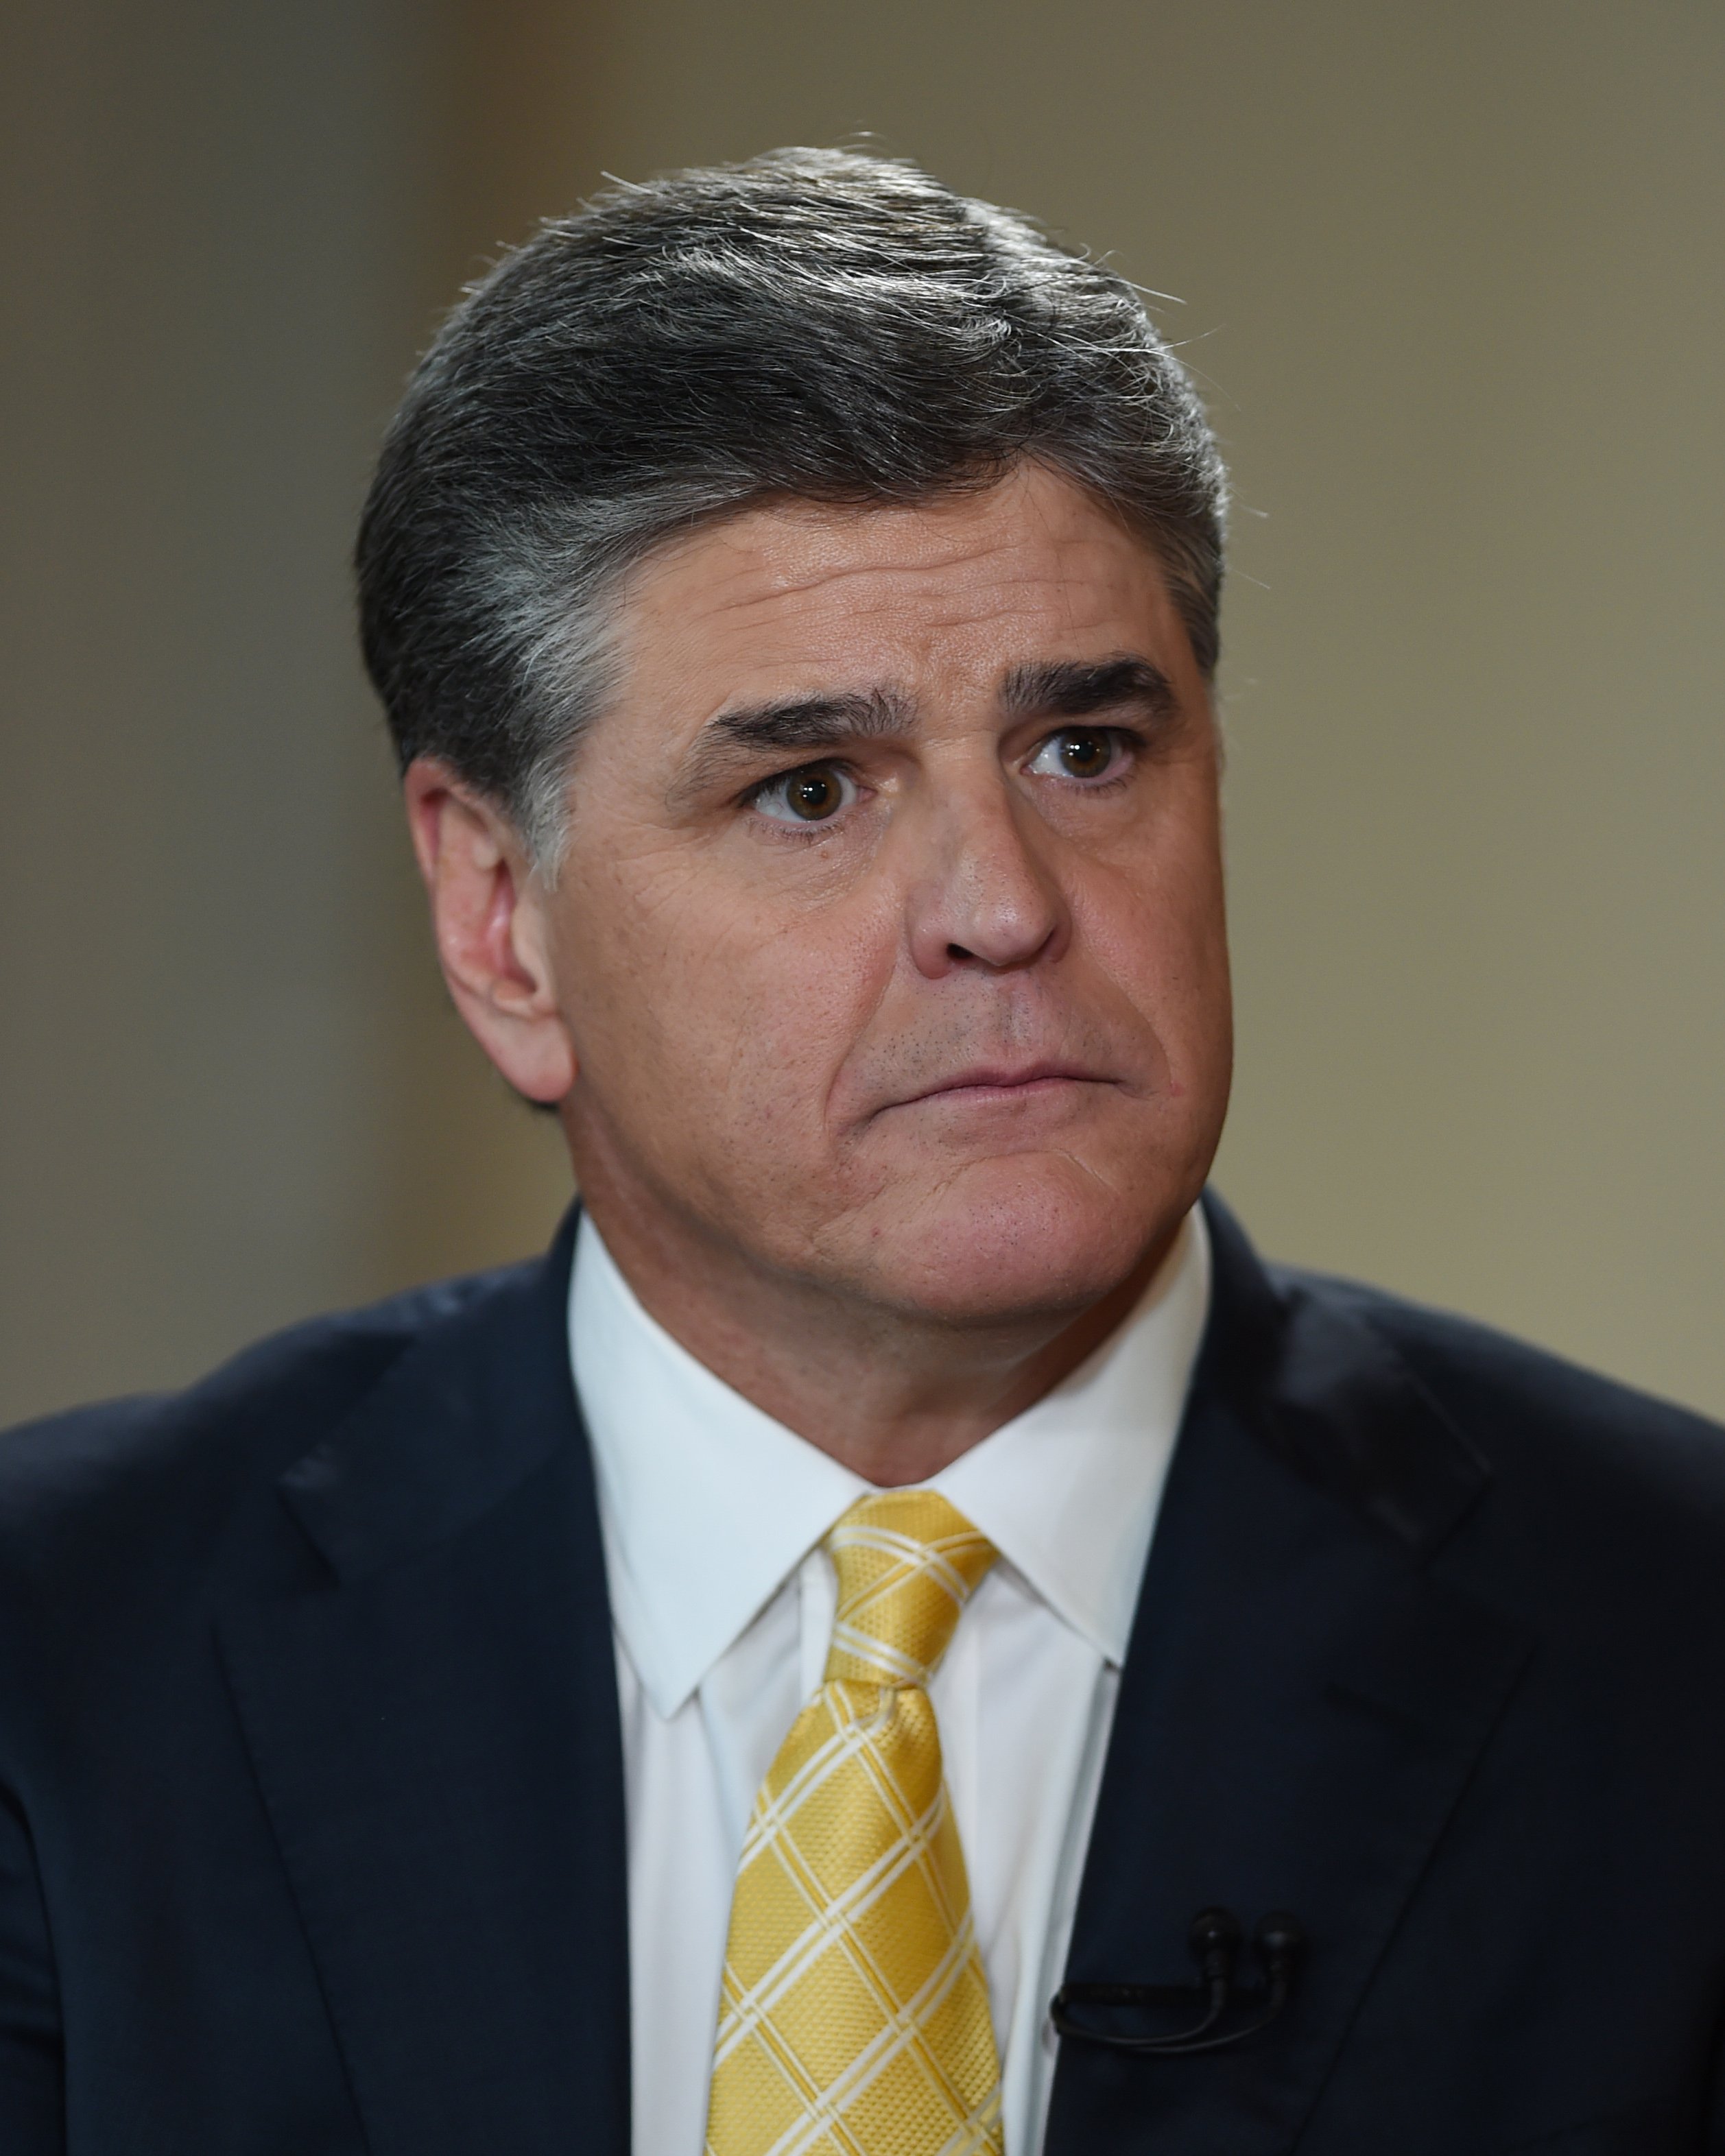 Sean Hannity at Freedom Tower on April 13, 2015 in Miami, Florida. | Source: Getty Images